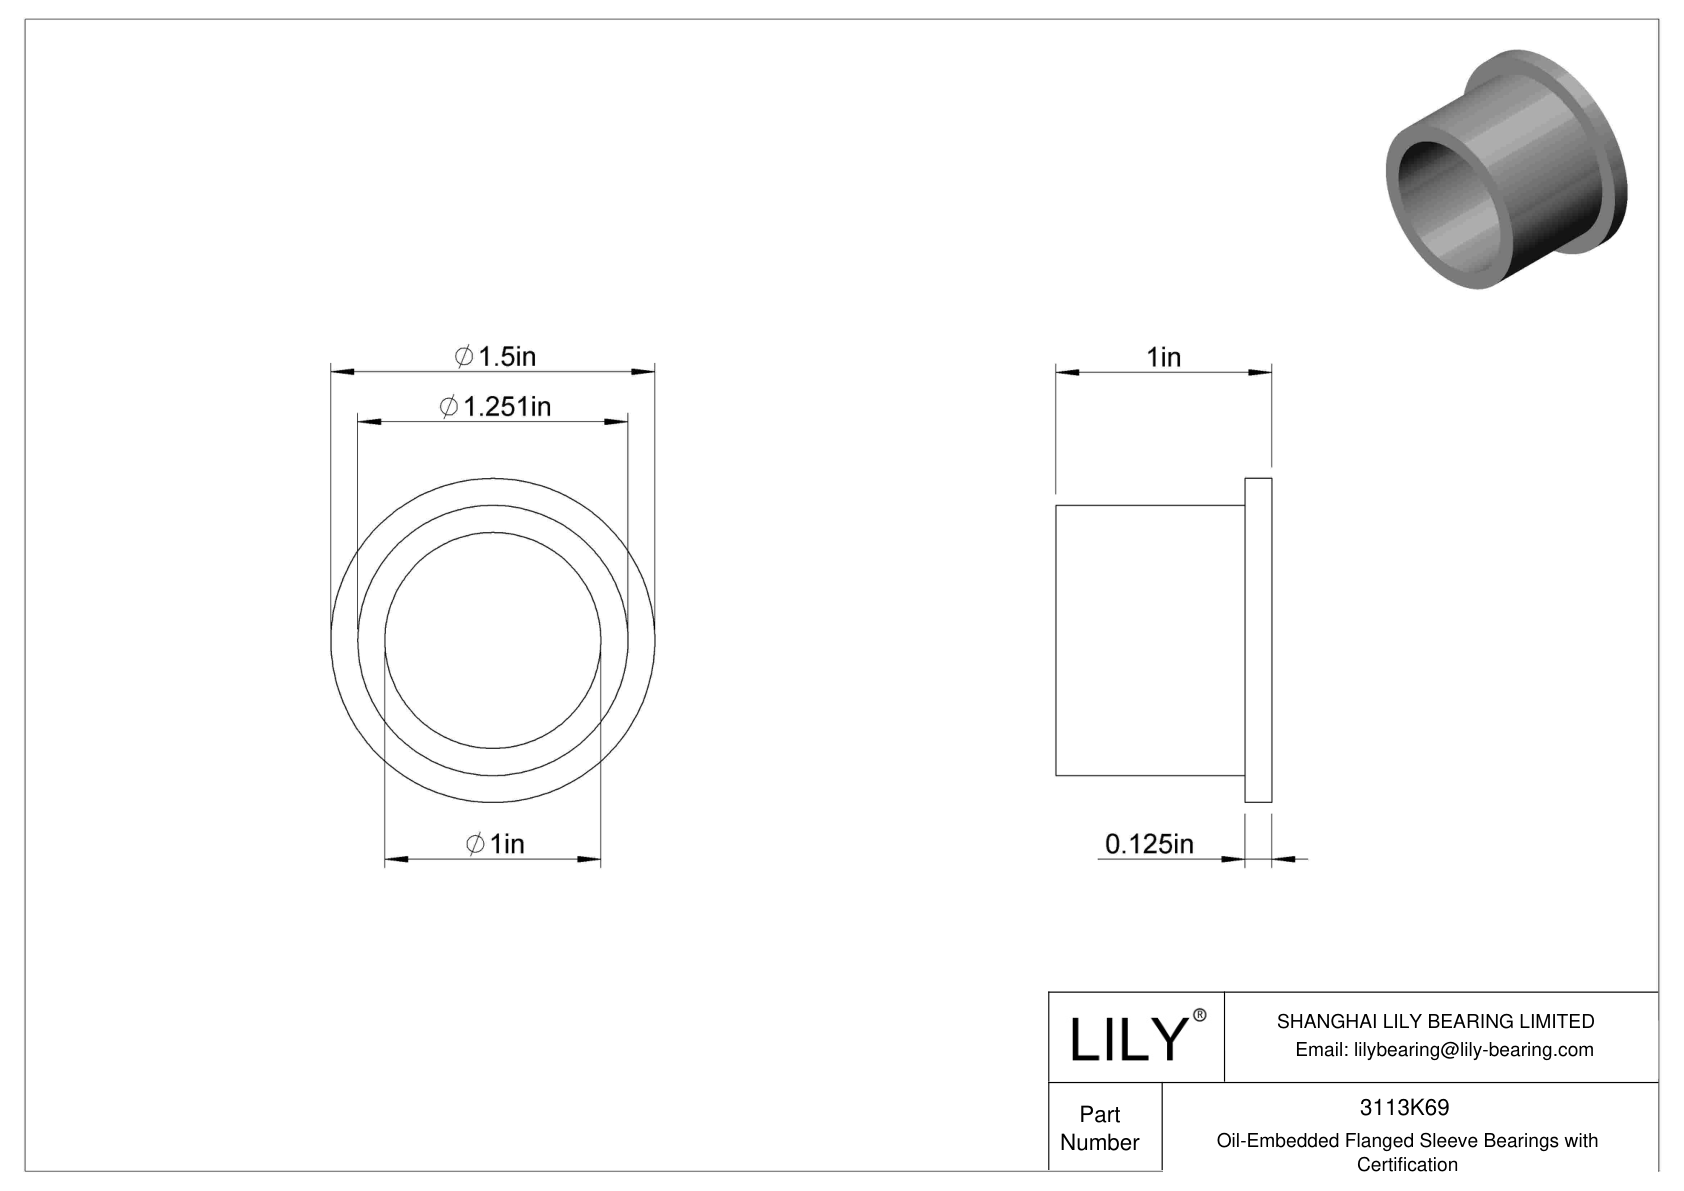 DBBDKGJ Oil-Embedded Flanged Sleeve Bearings with Certification cad drawing